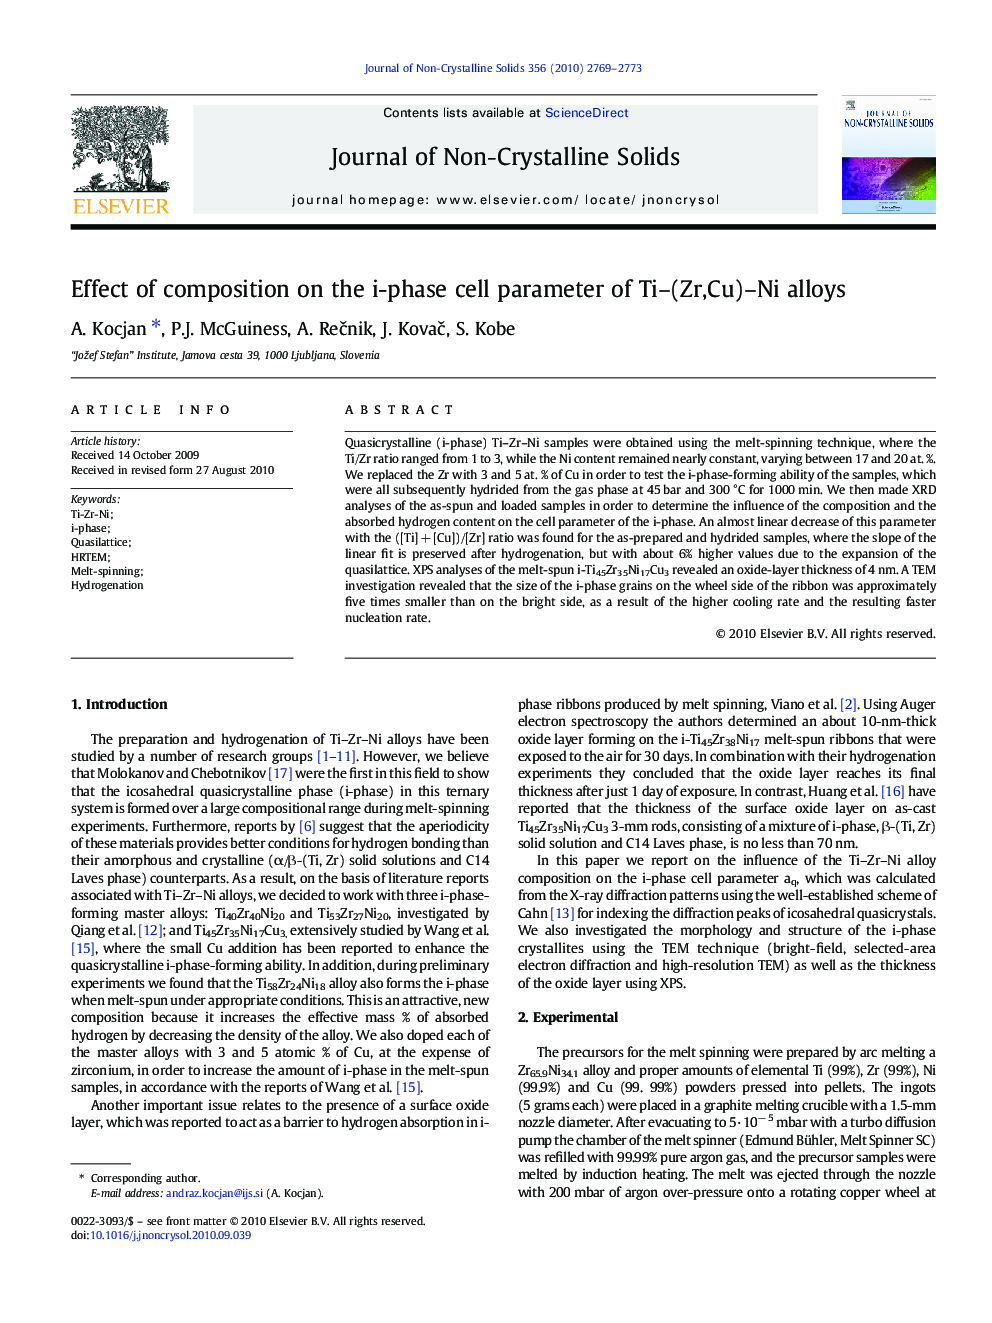 Effect of composition on the i-phase cell parameter of Ti–(Zr,Cu)–Ni alloys